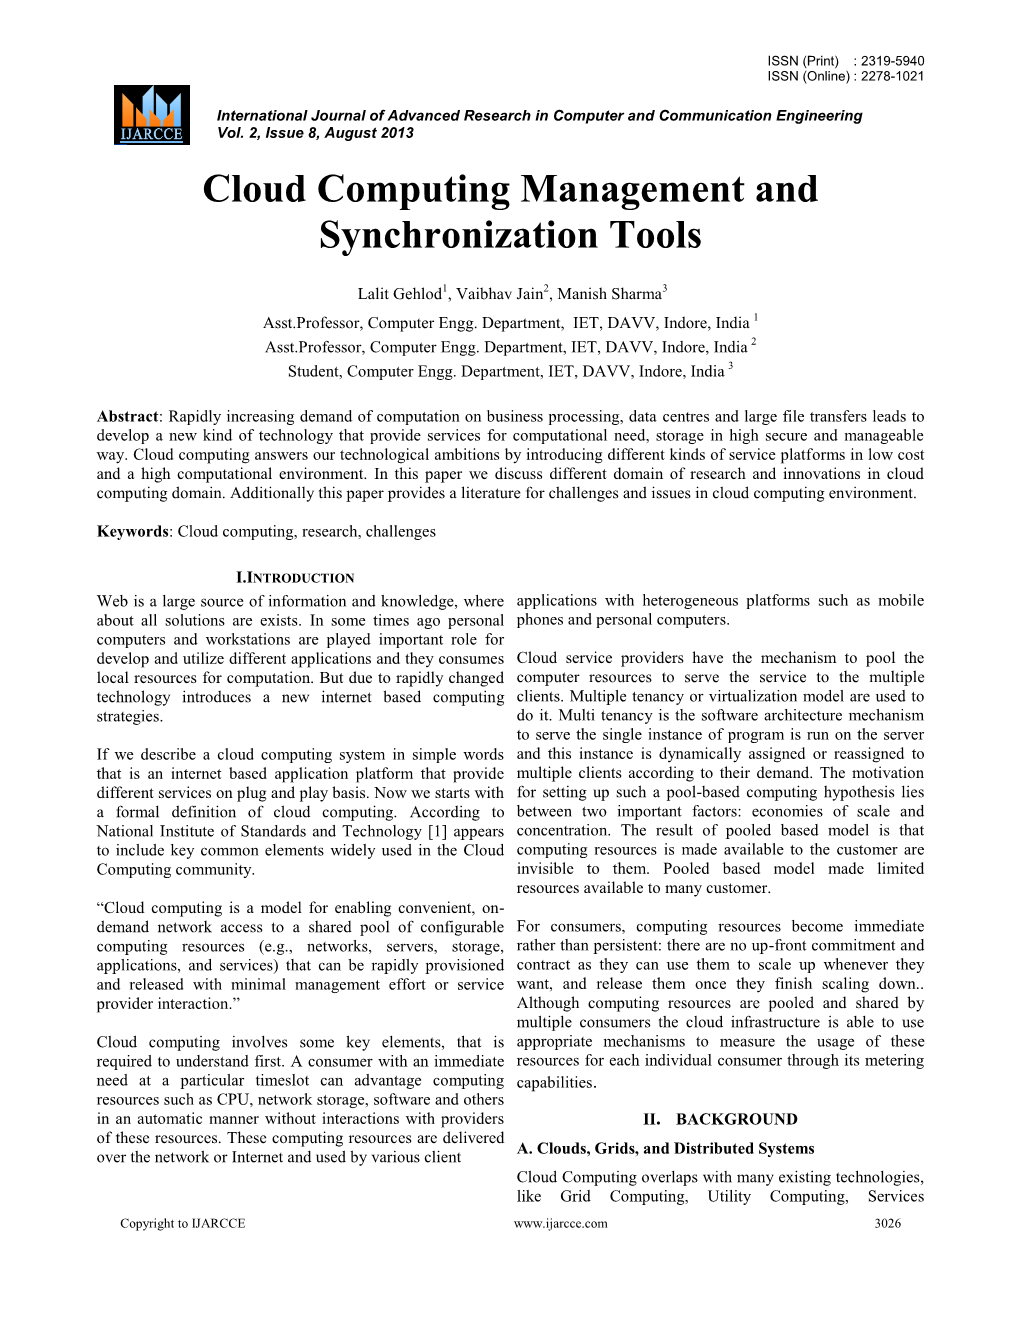 Cloud Computing Management and Synchronization Tools